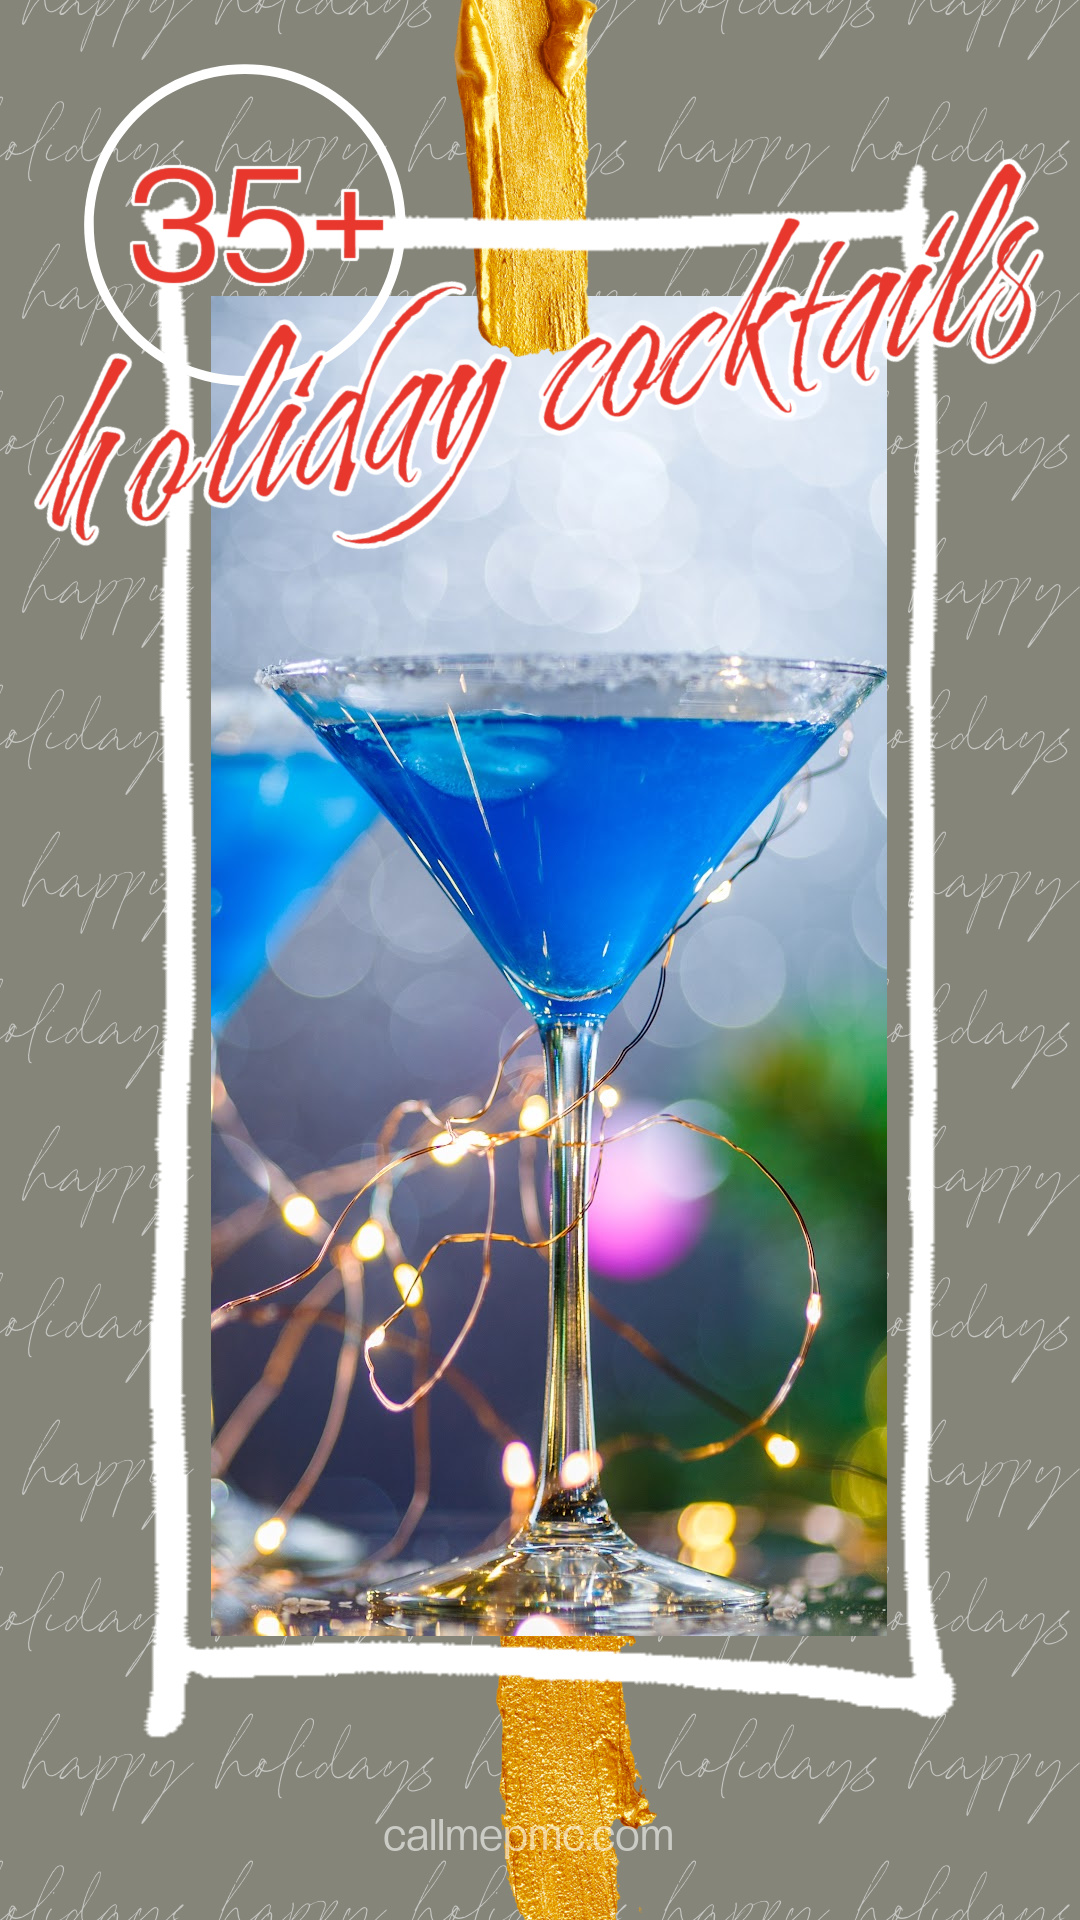 Add extra cheer in your holiday season this year with these Easy Festive Christmas Cocktails recipes from Call Me PMc #baking #recipes #callmepmc #cocktails